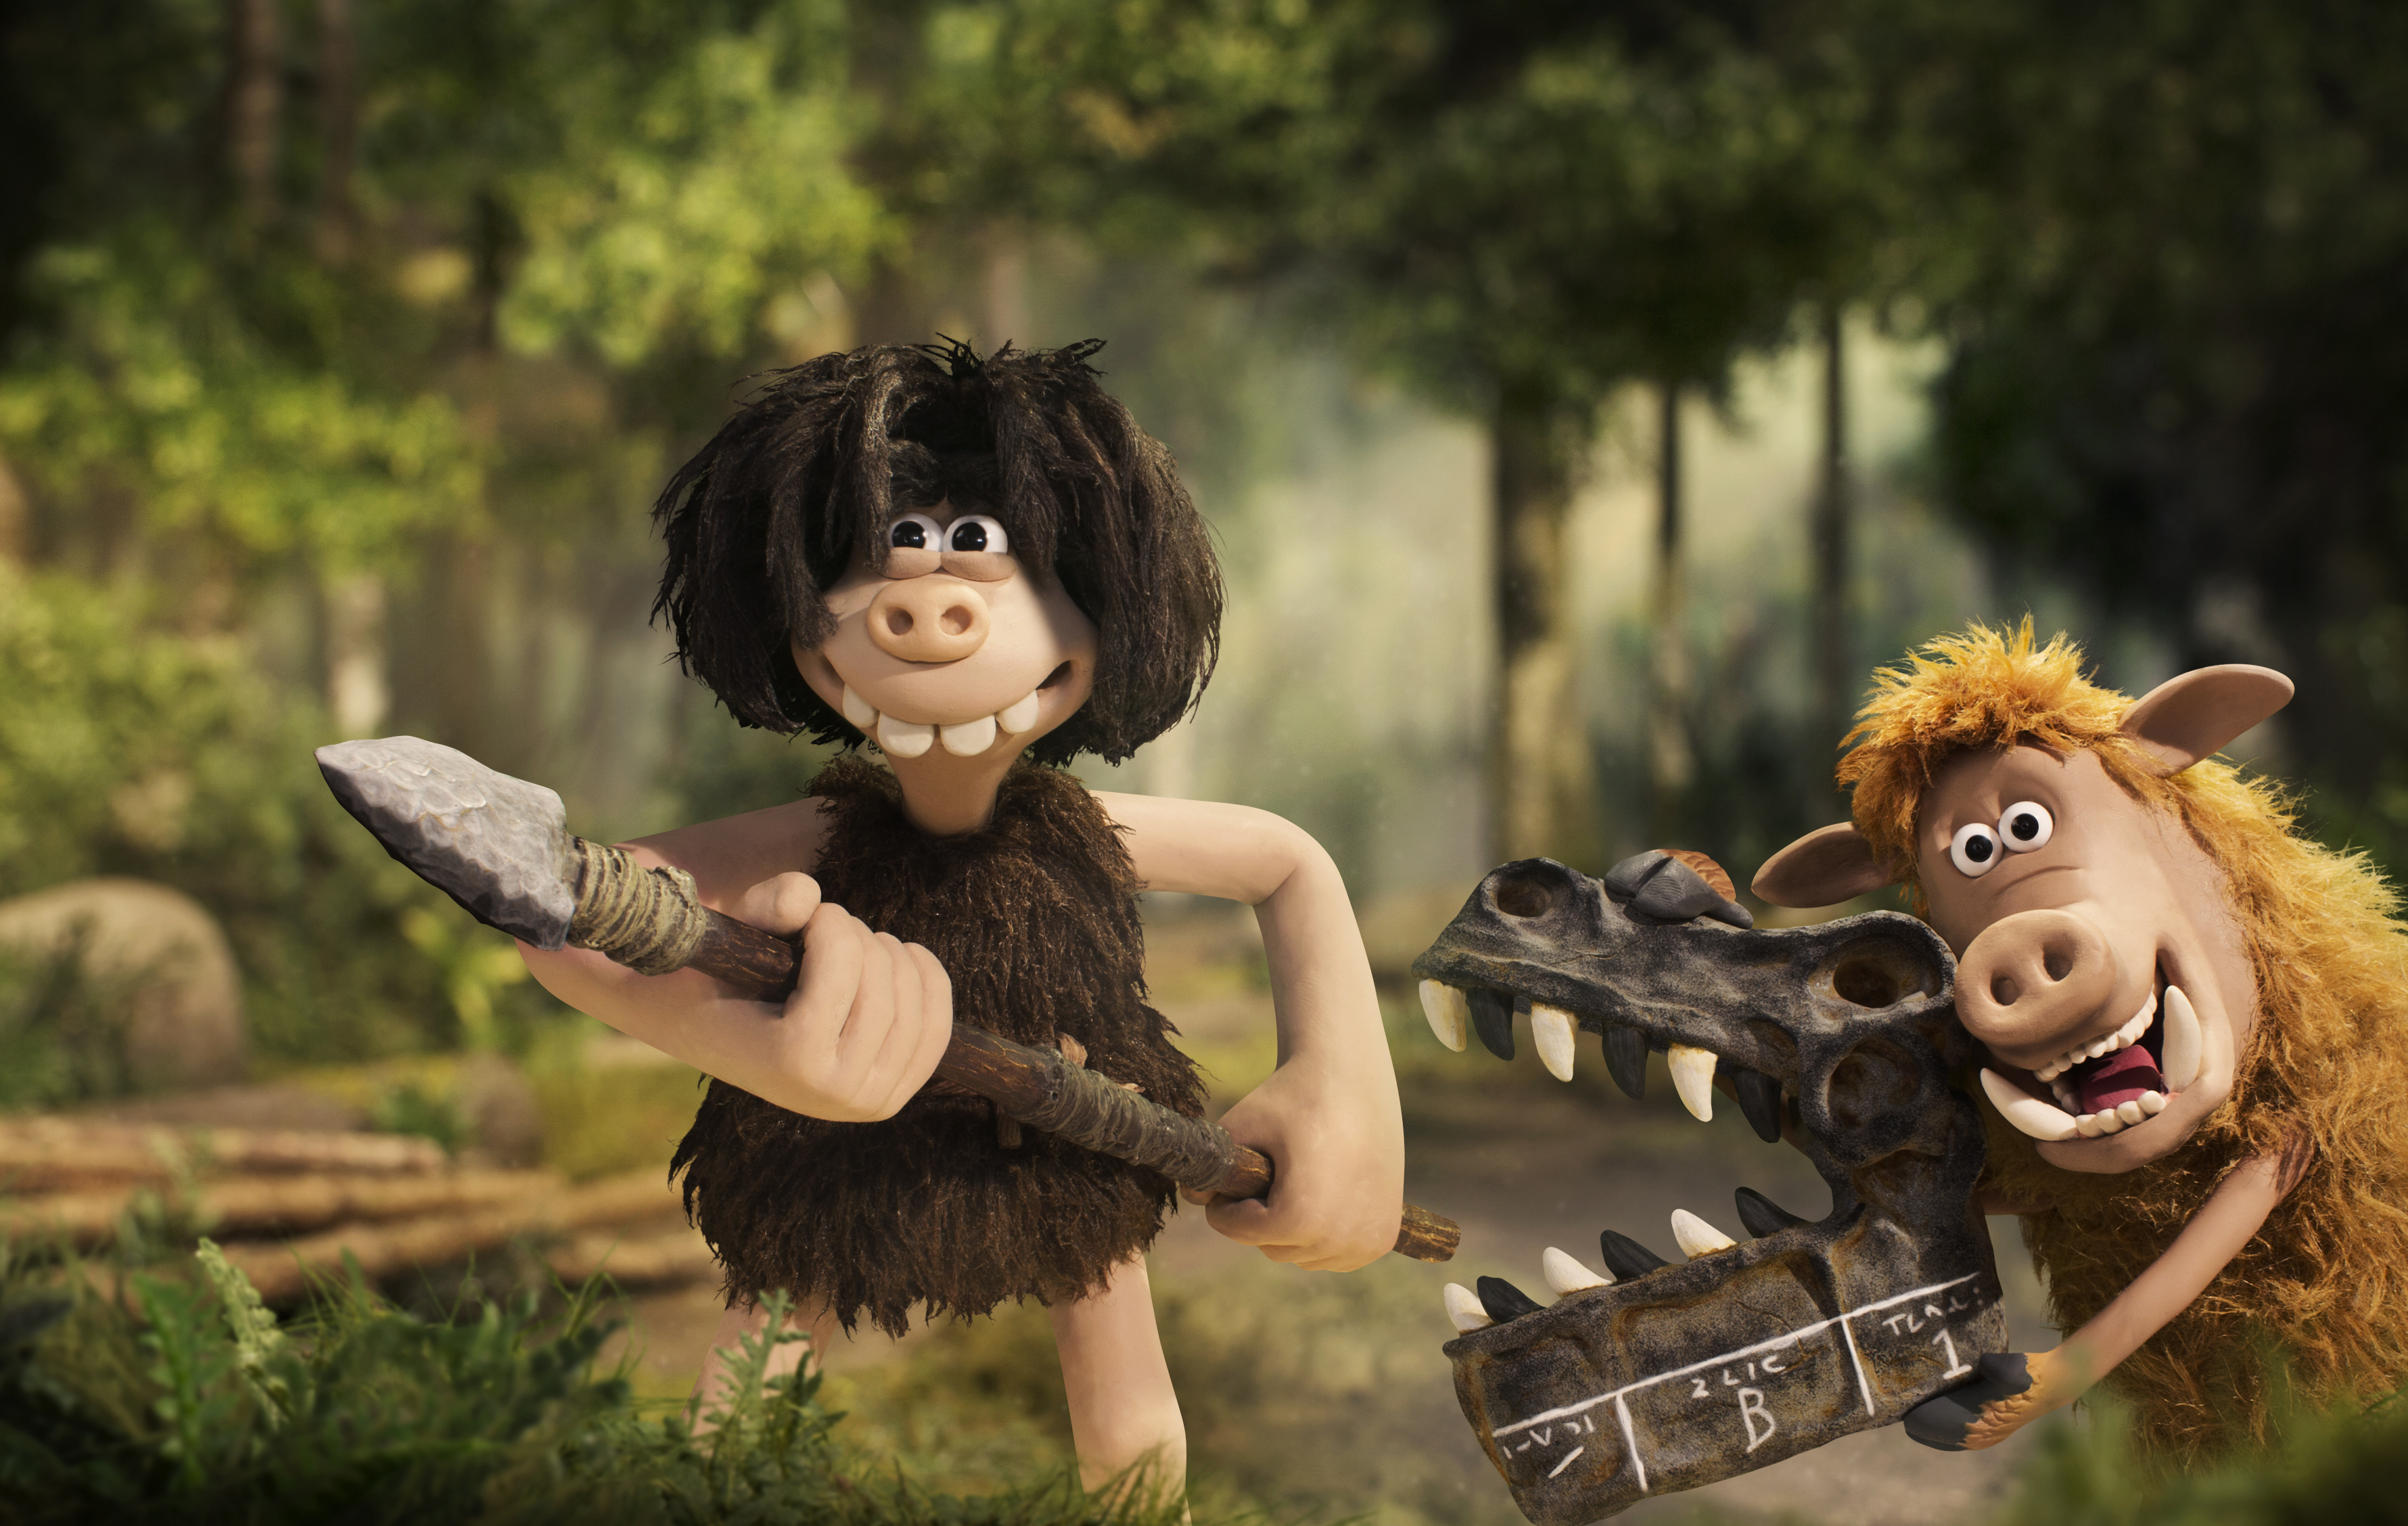 Early Man – Dug and Hognob. Publicity image from S